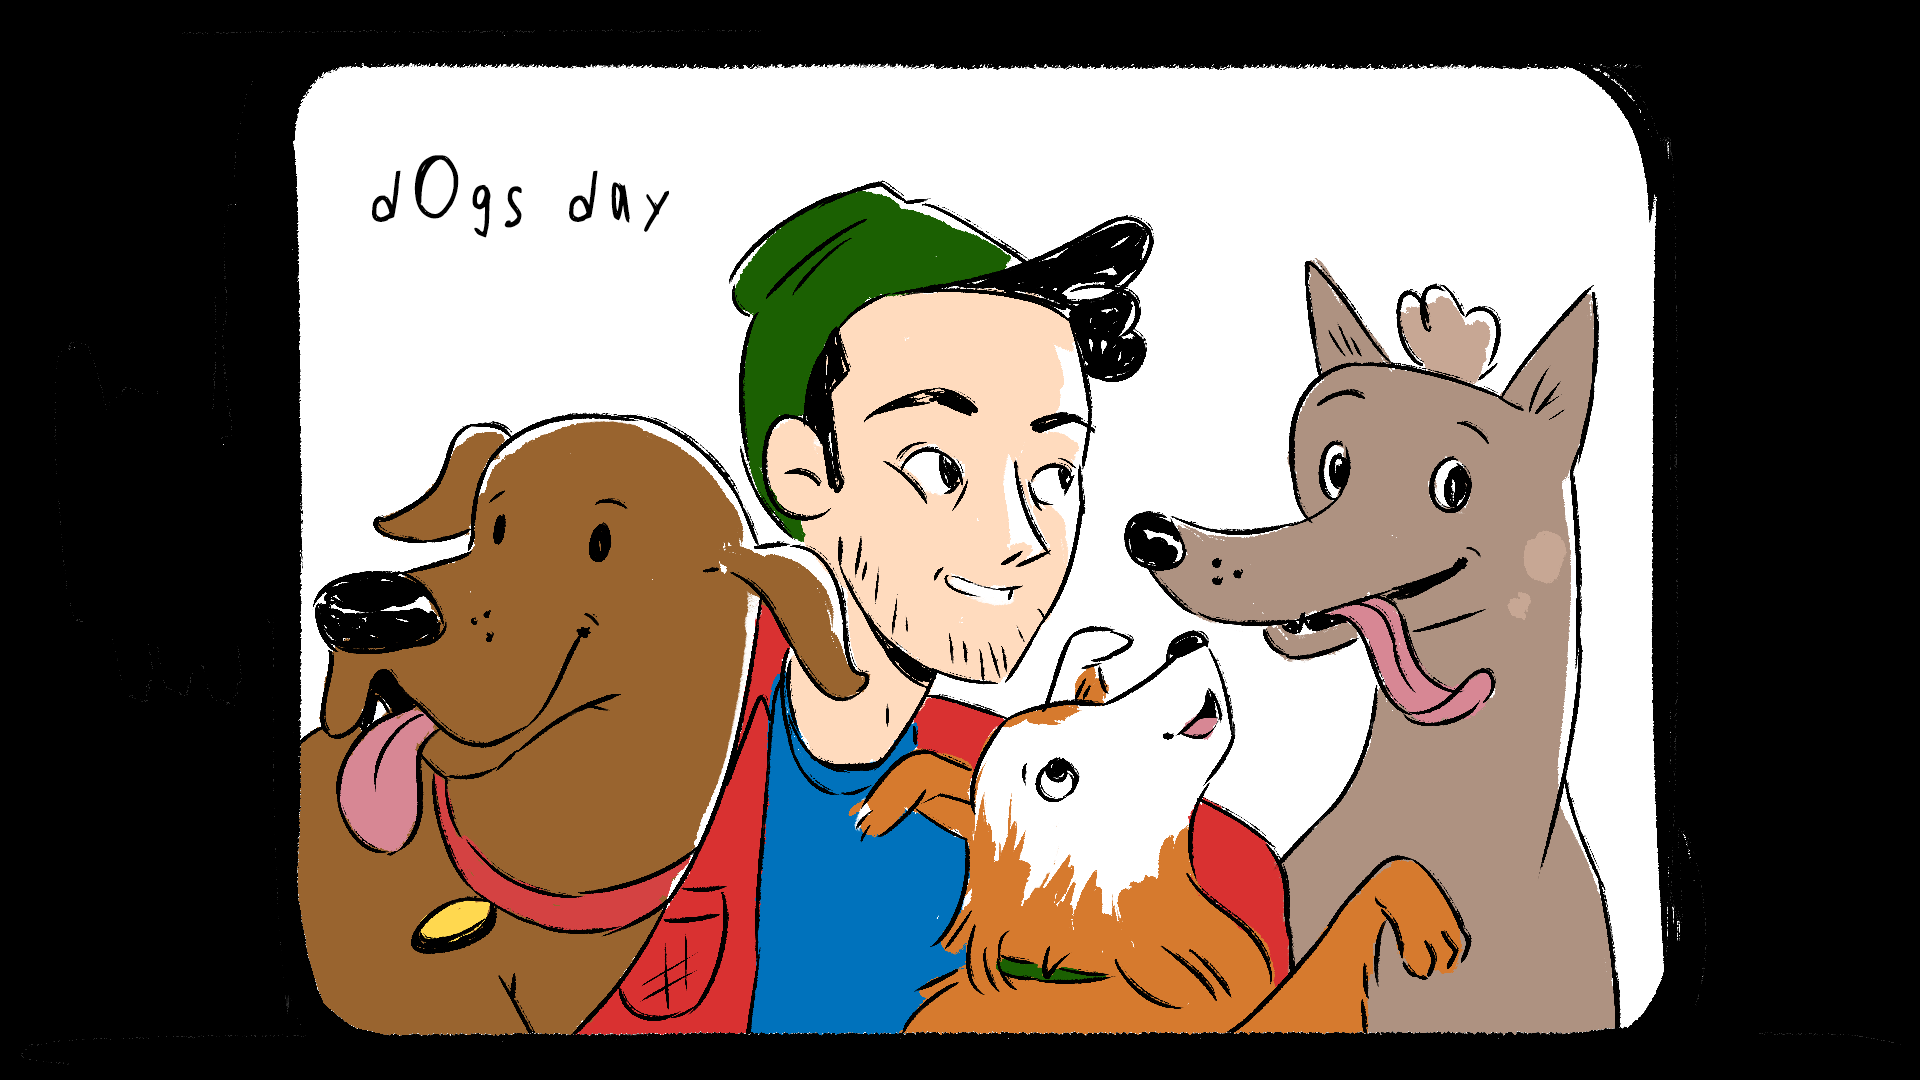 Dogs Day